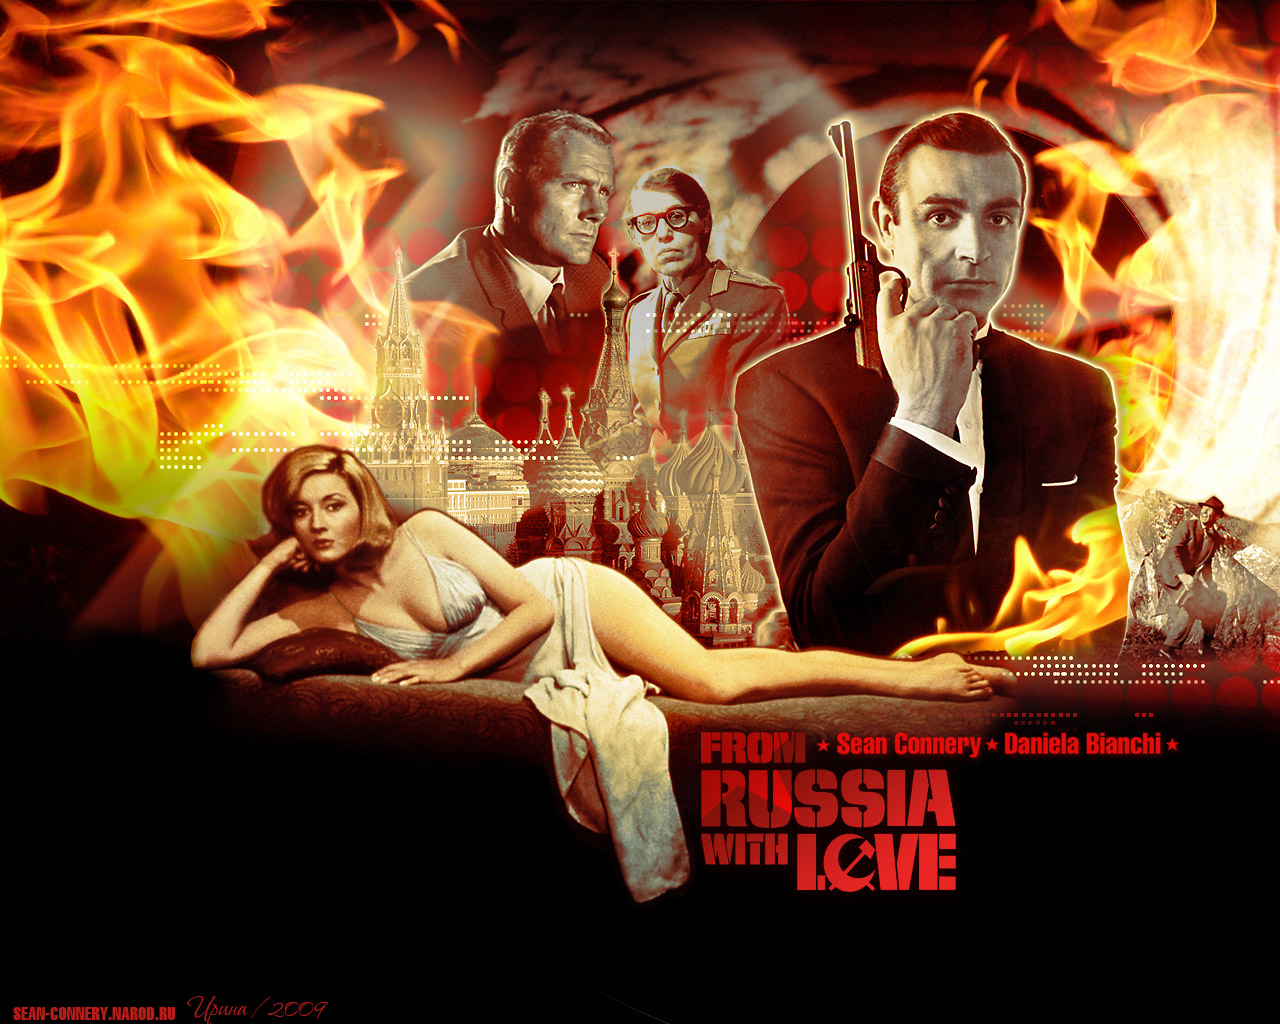 From Russia With Love Backgrounds, Compatible - PC, Mobile, Gadgets| 1280x1024 px